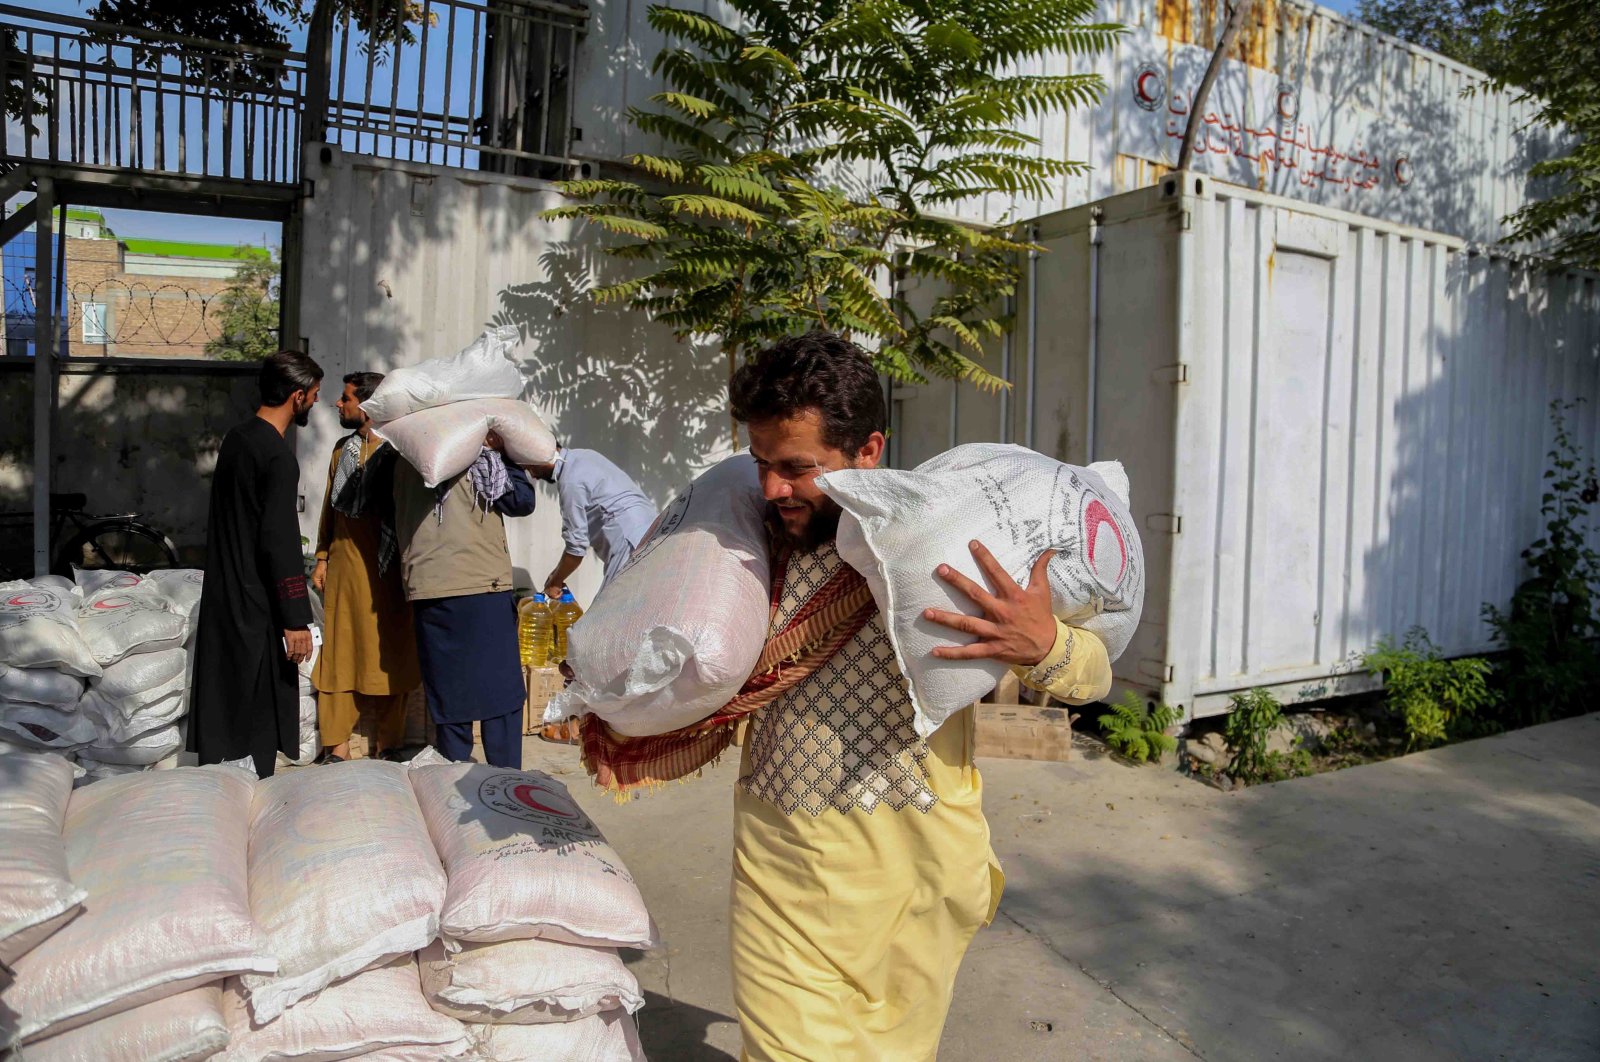 Internally displaced persons receive food aid distributed by the Red Crescent in Kabul, Afghanistan, Sept. 20, 2021. (EPA Photo)